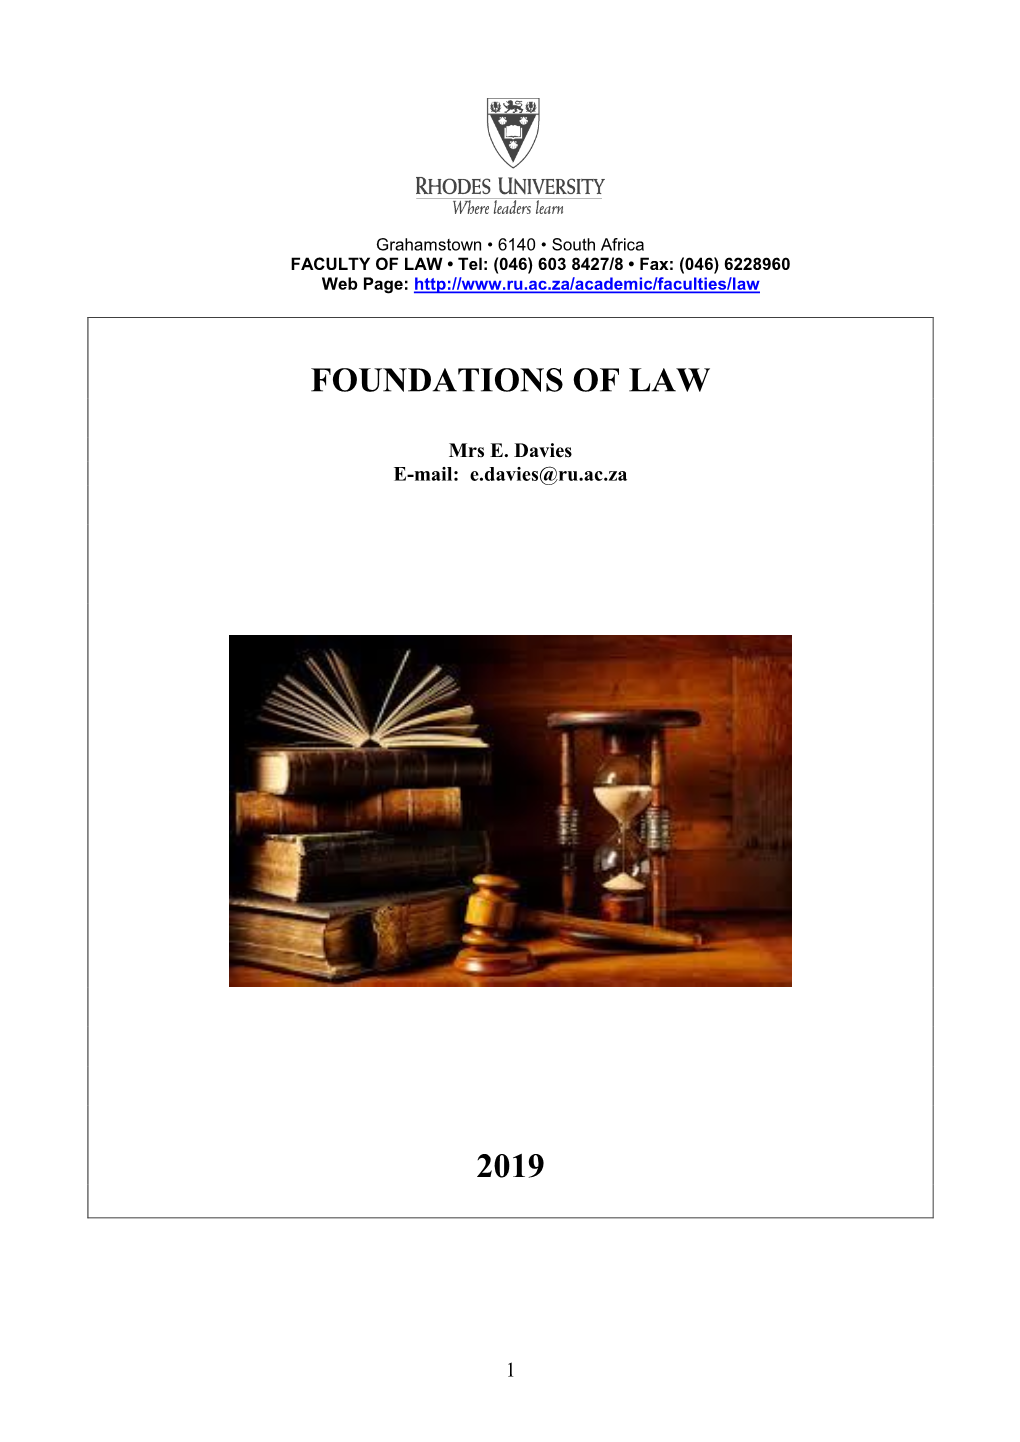 Foundations of Law